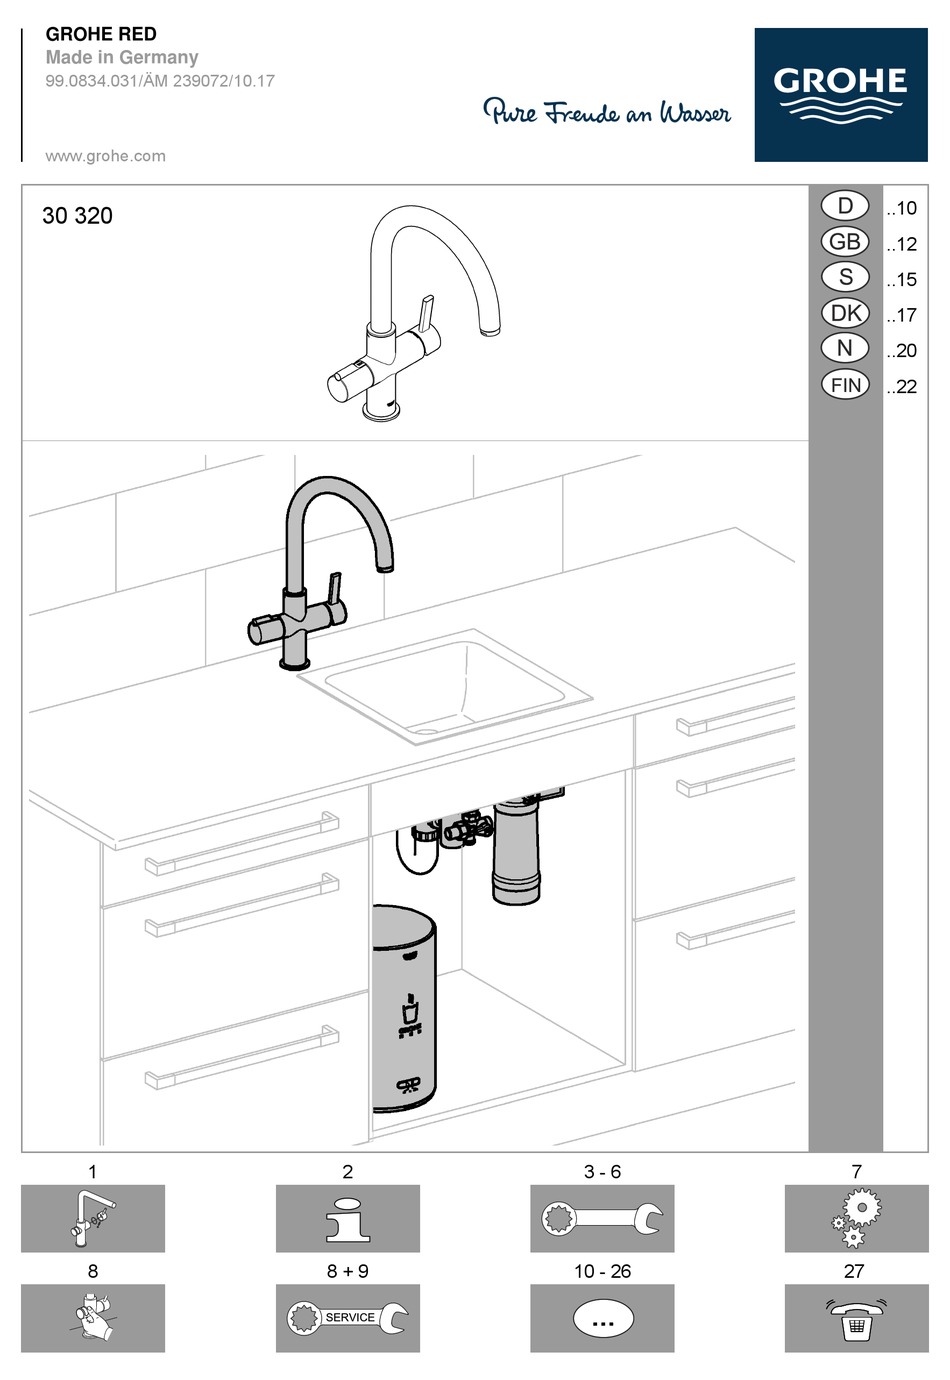 GROHE RED 30 320 MANUAL Download